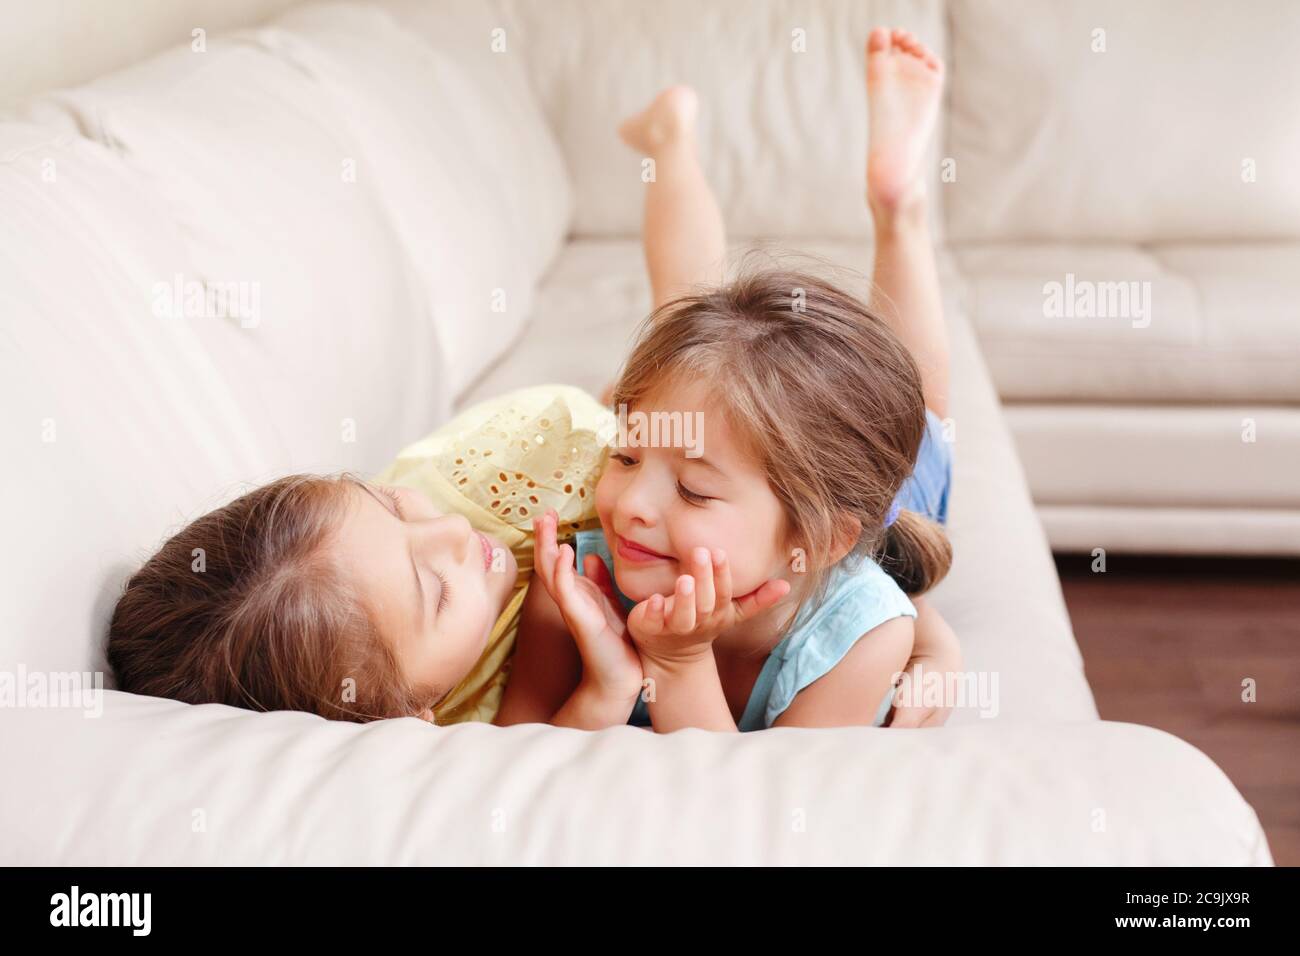 Two cute little Caucasian girls siblings playing at home. Adorable smiling children kids lying on couch together. Authentic candid lifestyle domestic Stock Photo